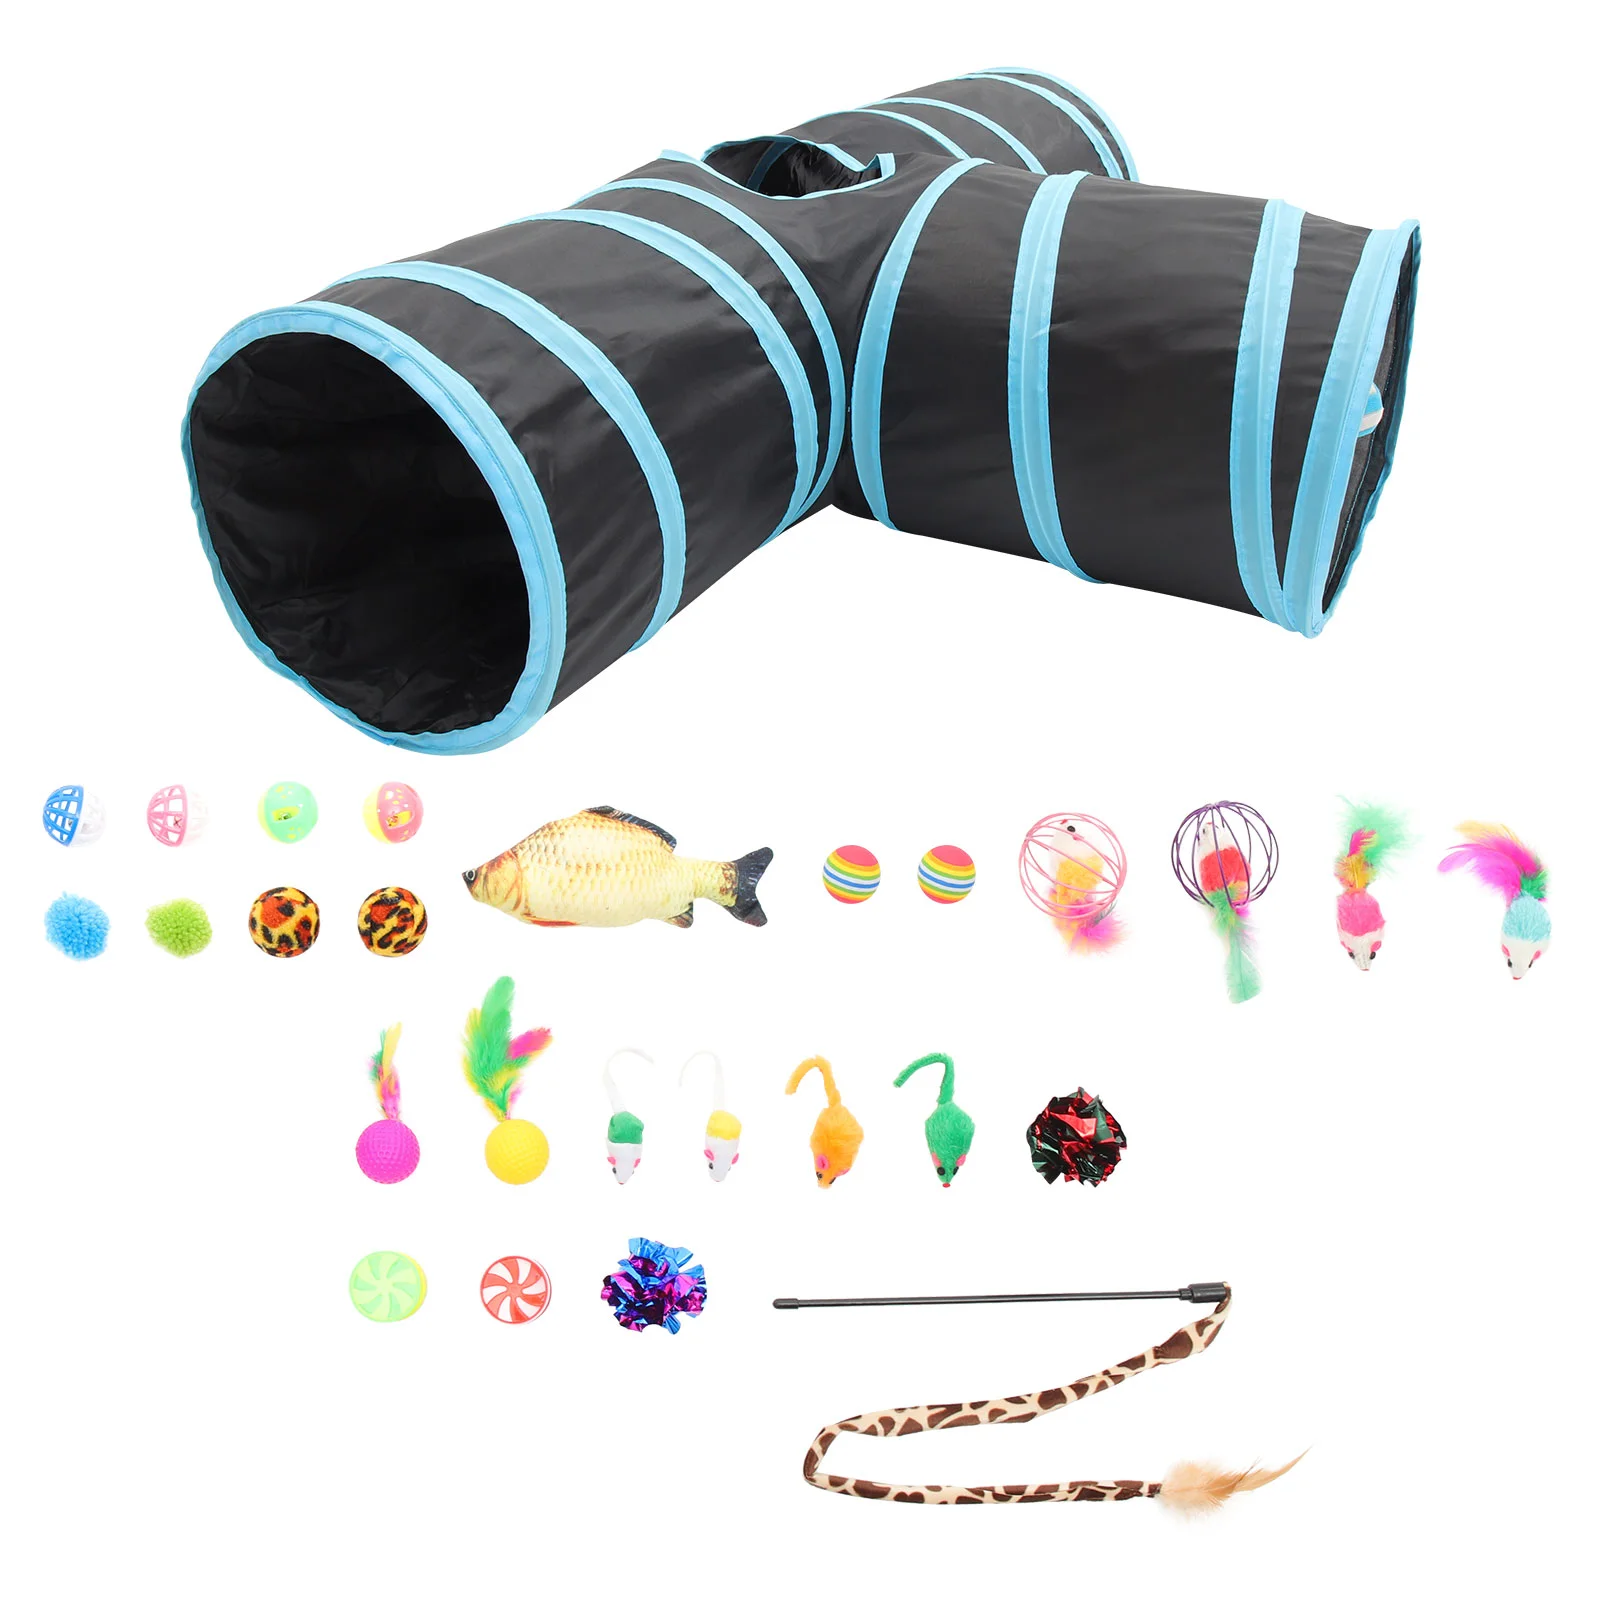 

Cat Toy Toys Tunnel Teaser Interactive Kitten Pet Cats Catnip Tube Play Catcher Indoor Exercise String Playing Collapsible